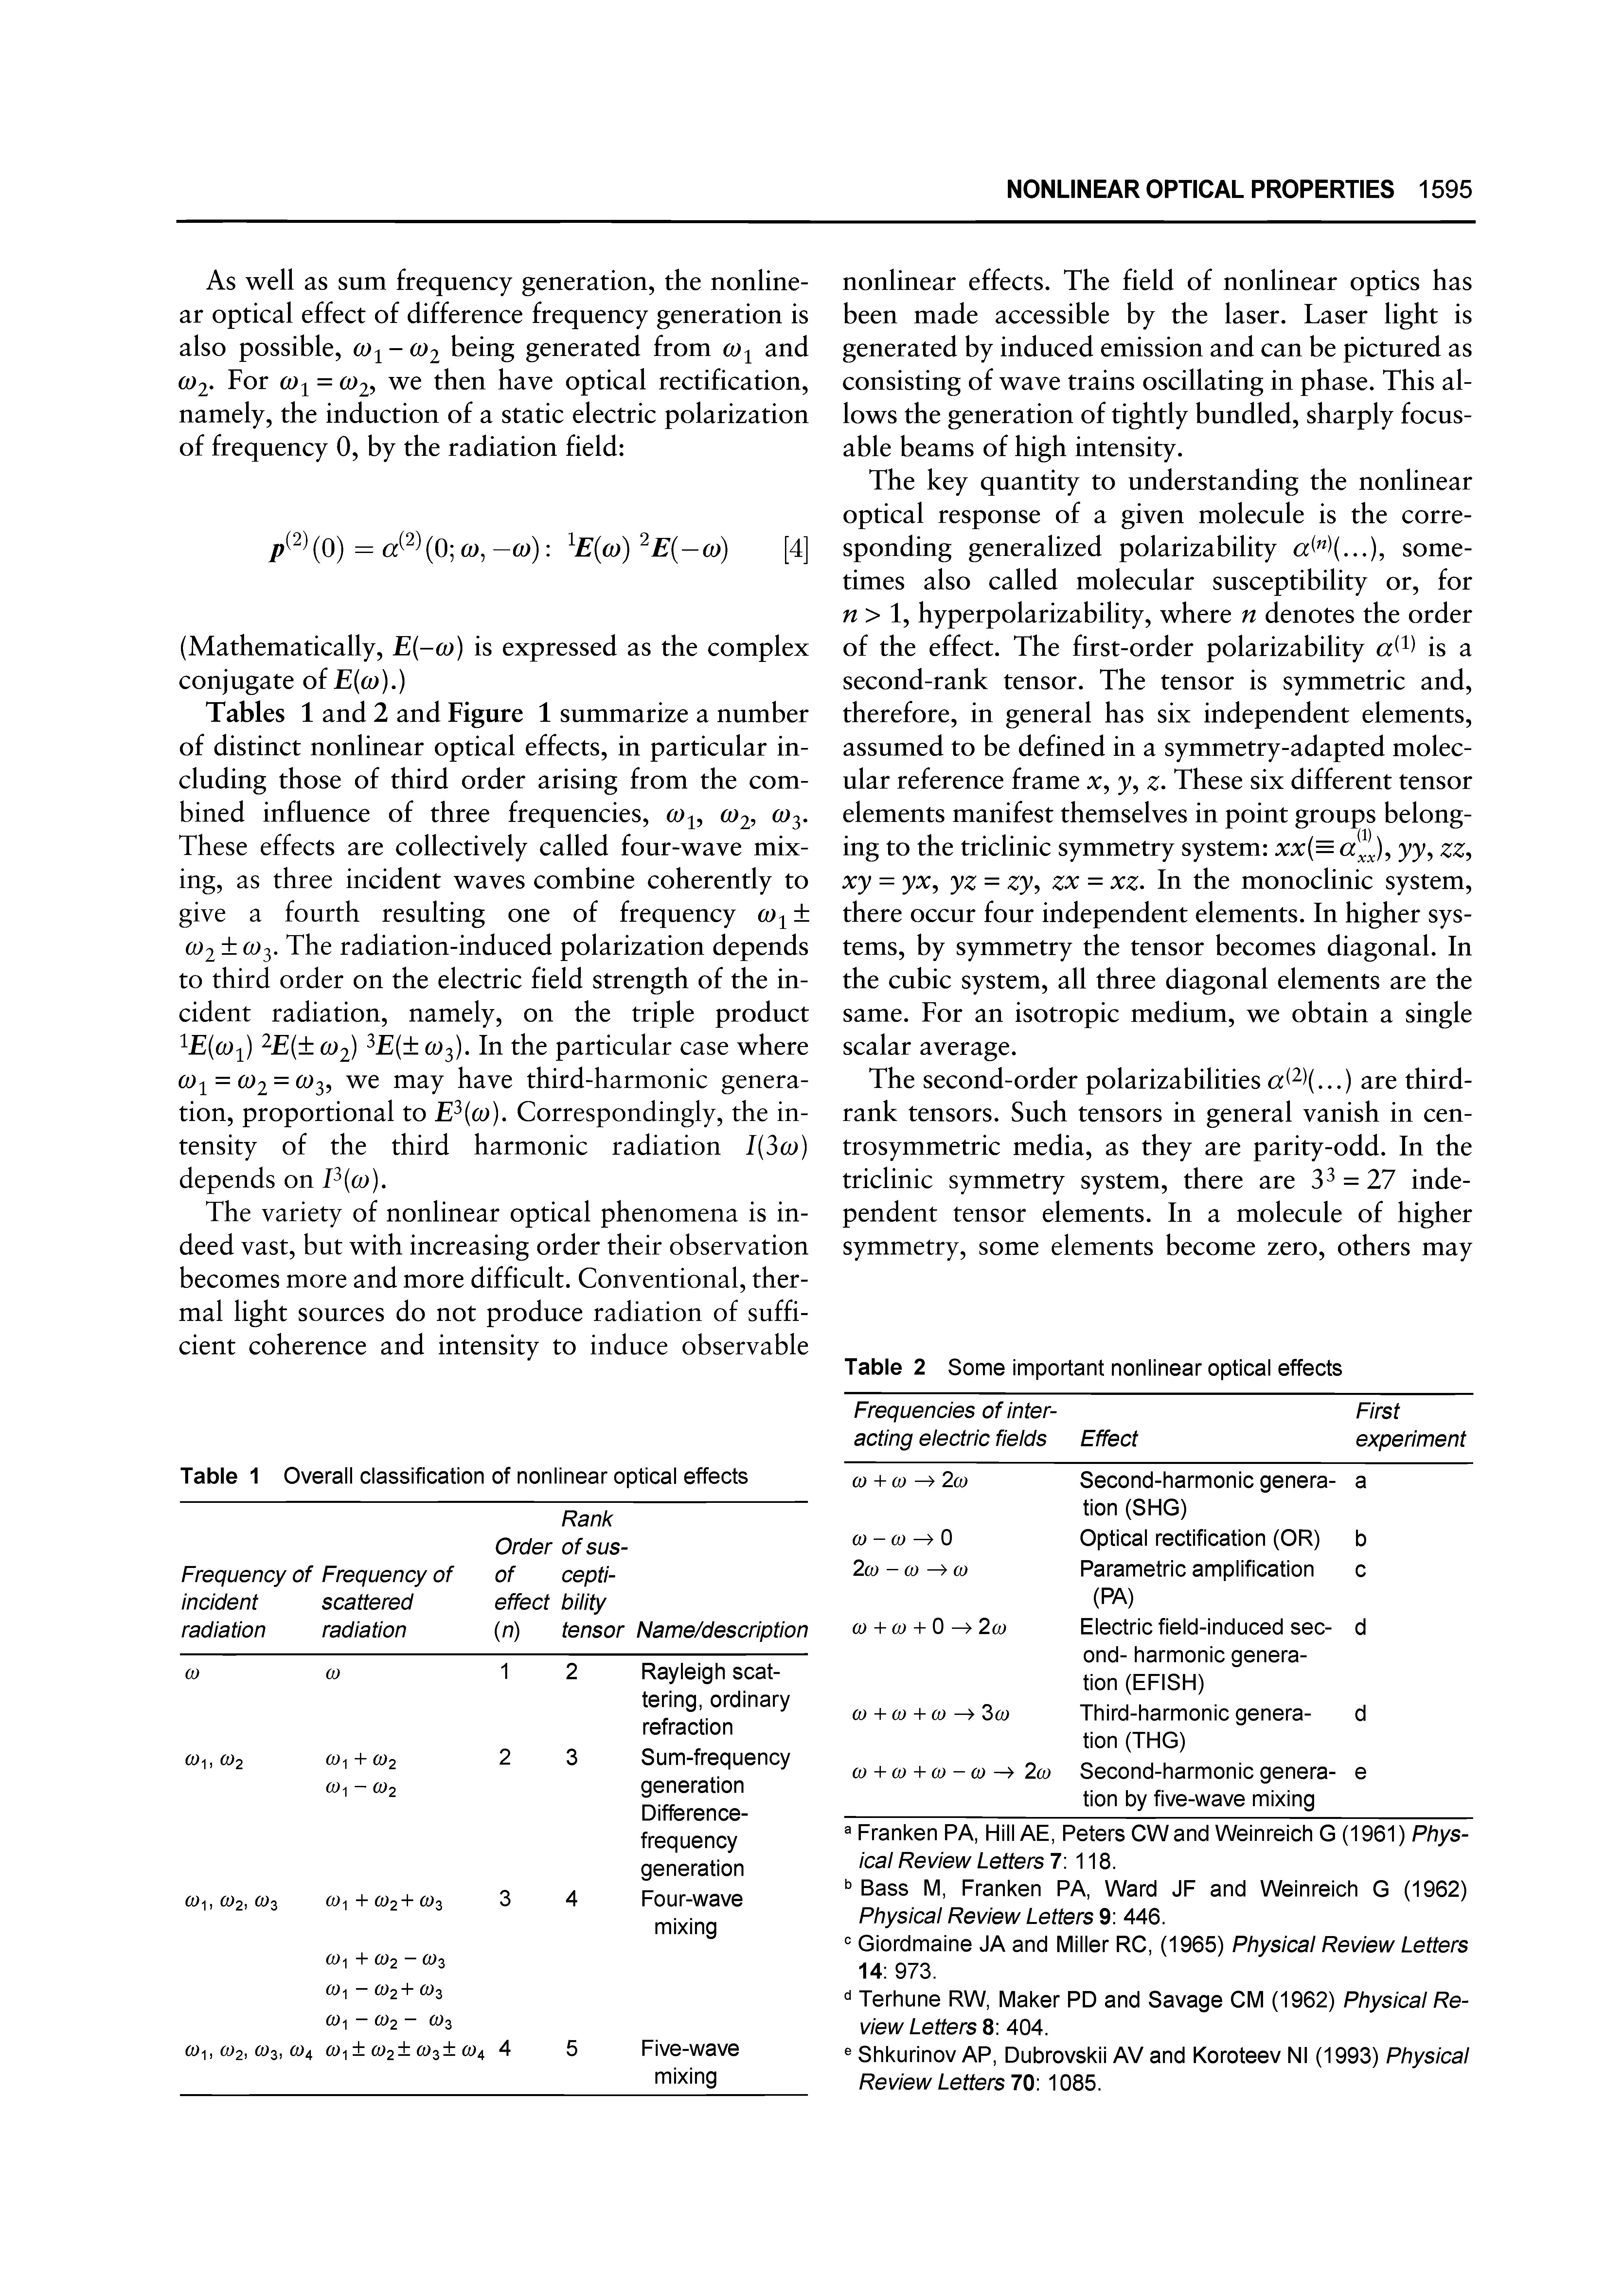 Tables 1 and 2 and Figure 1 summarize a number of distinct nonlinear optical effects, in particular including those of third order arising from the combined influence of three frequencies, CO2, (Oy These effects are collectively called four-wave mixing, as three incident waves combine coherently to give a fourth resulting one of frequency o)i 0)2 o)y The radiation-induced polarization depends to third order on the electric field strength of the incident radiation, namely, on the triple product E(o)i) 2 ( (O2) E( ( 3). In the particular case where co = a)2 = o)y we may have third-harmonic generation, proportional to E (o)). Correspondingly, the intensity of the third harmonic radiation I(3oo) depends on P((jo),...